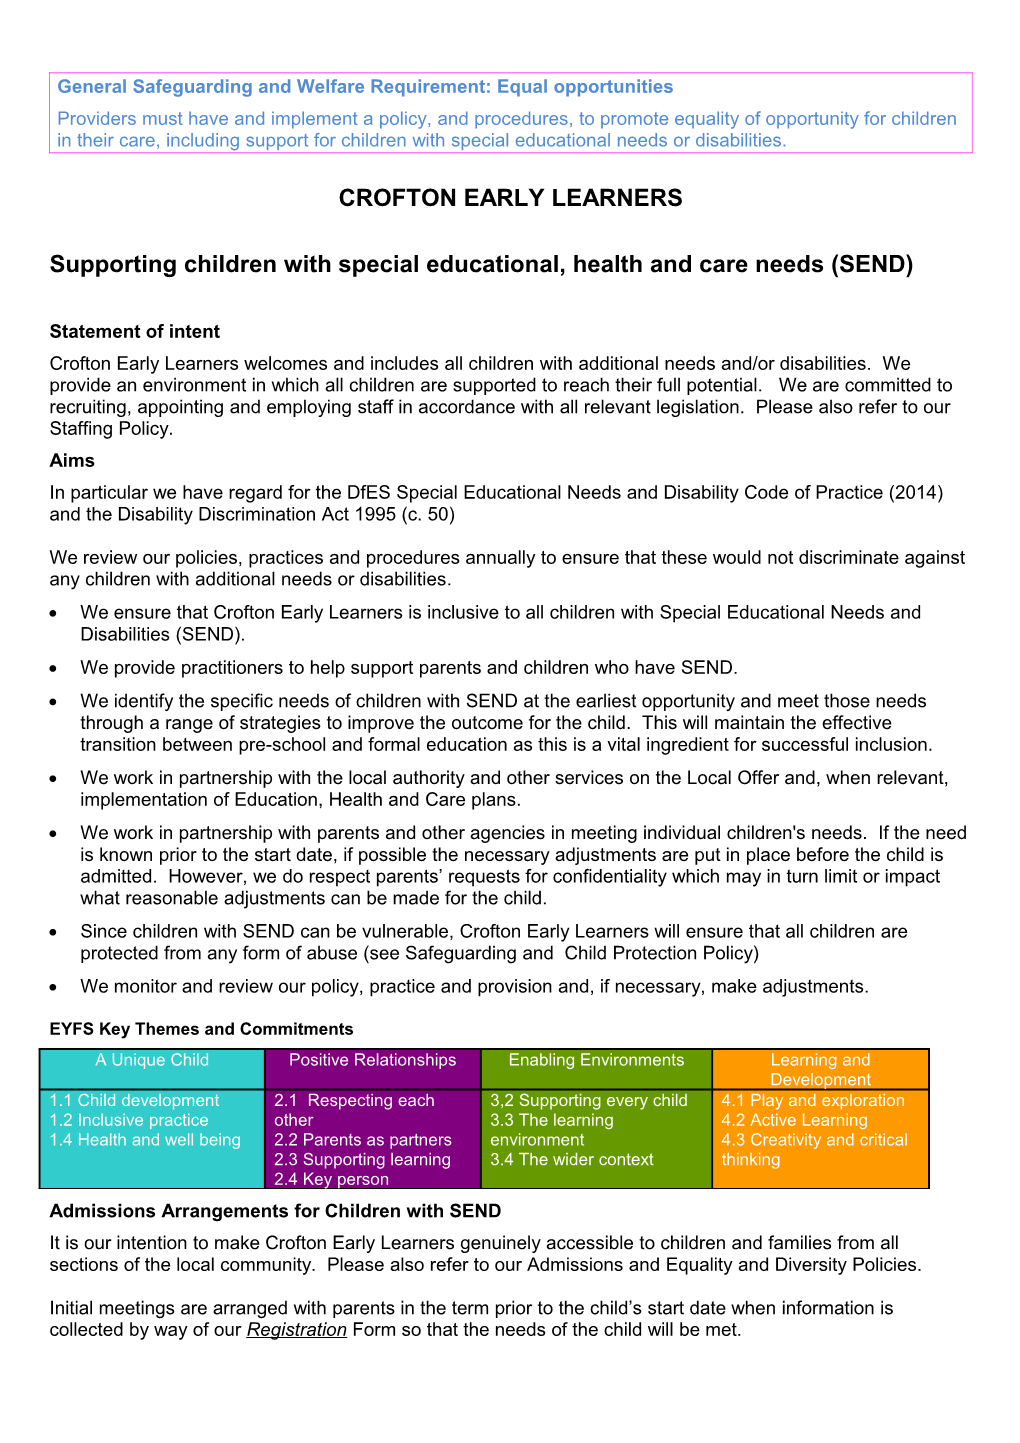 Supporting Children with Special Educational, Health and Care Needs(SEND)